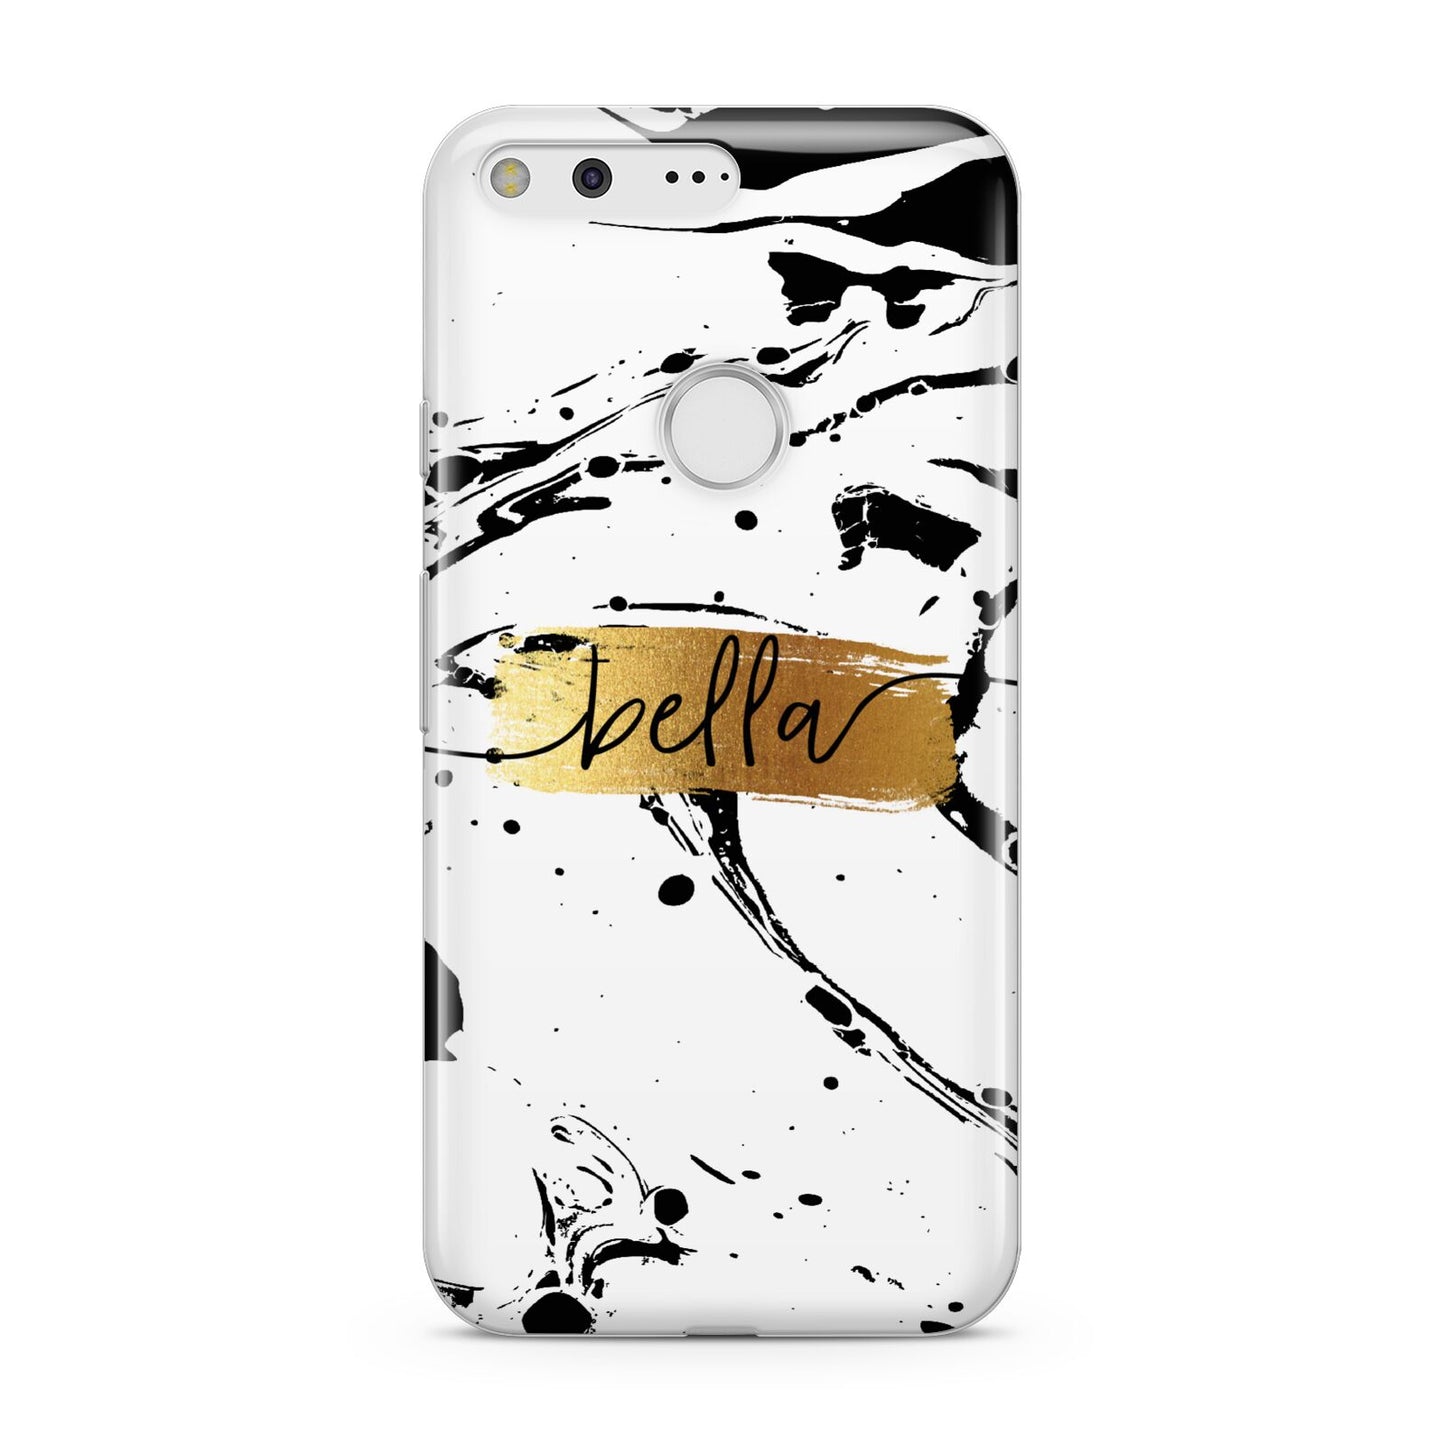 Personalised White Gold Swirl Marble Google Pixel Case